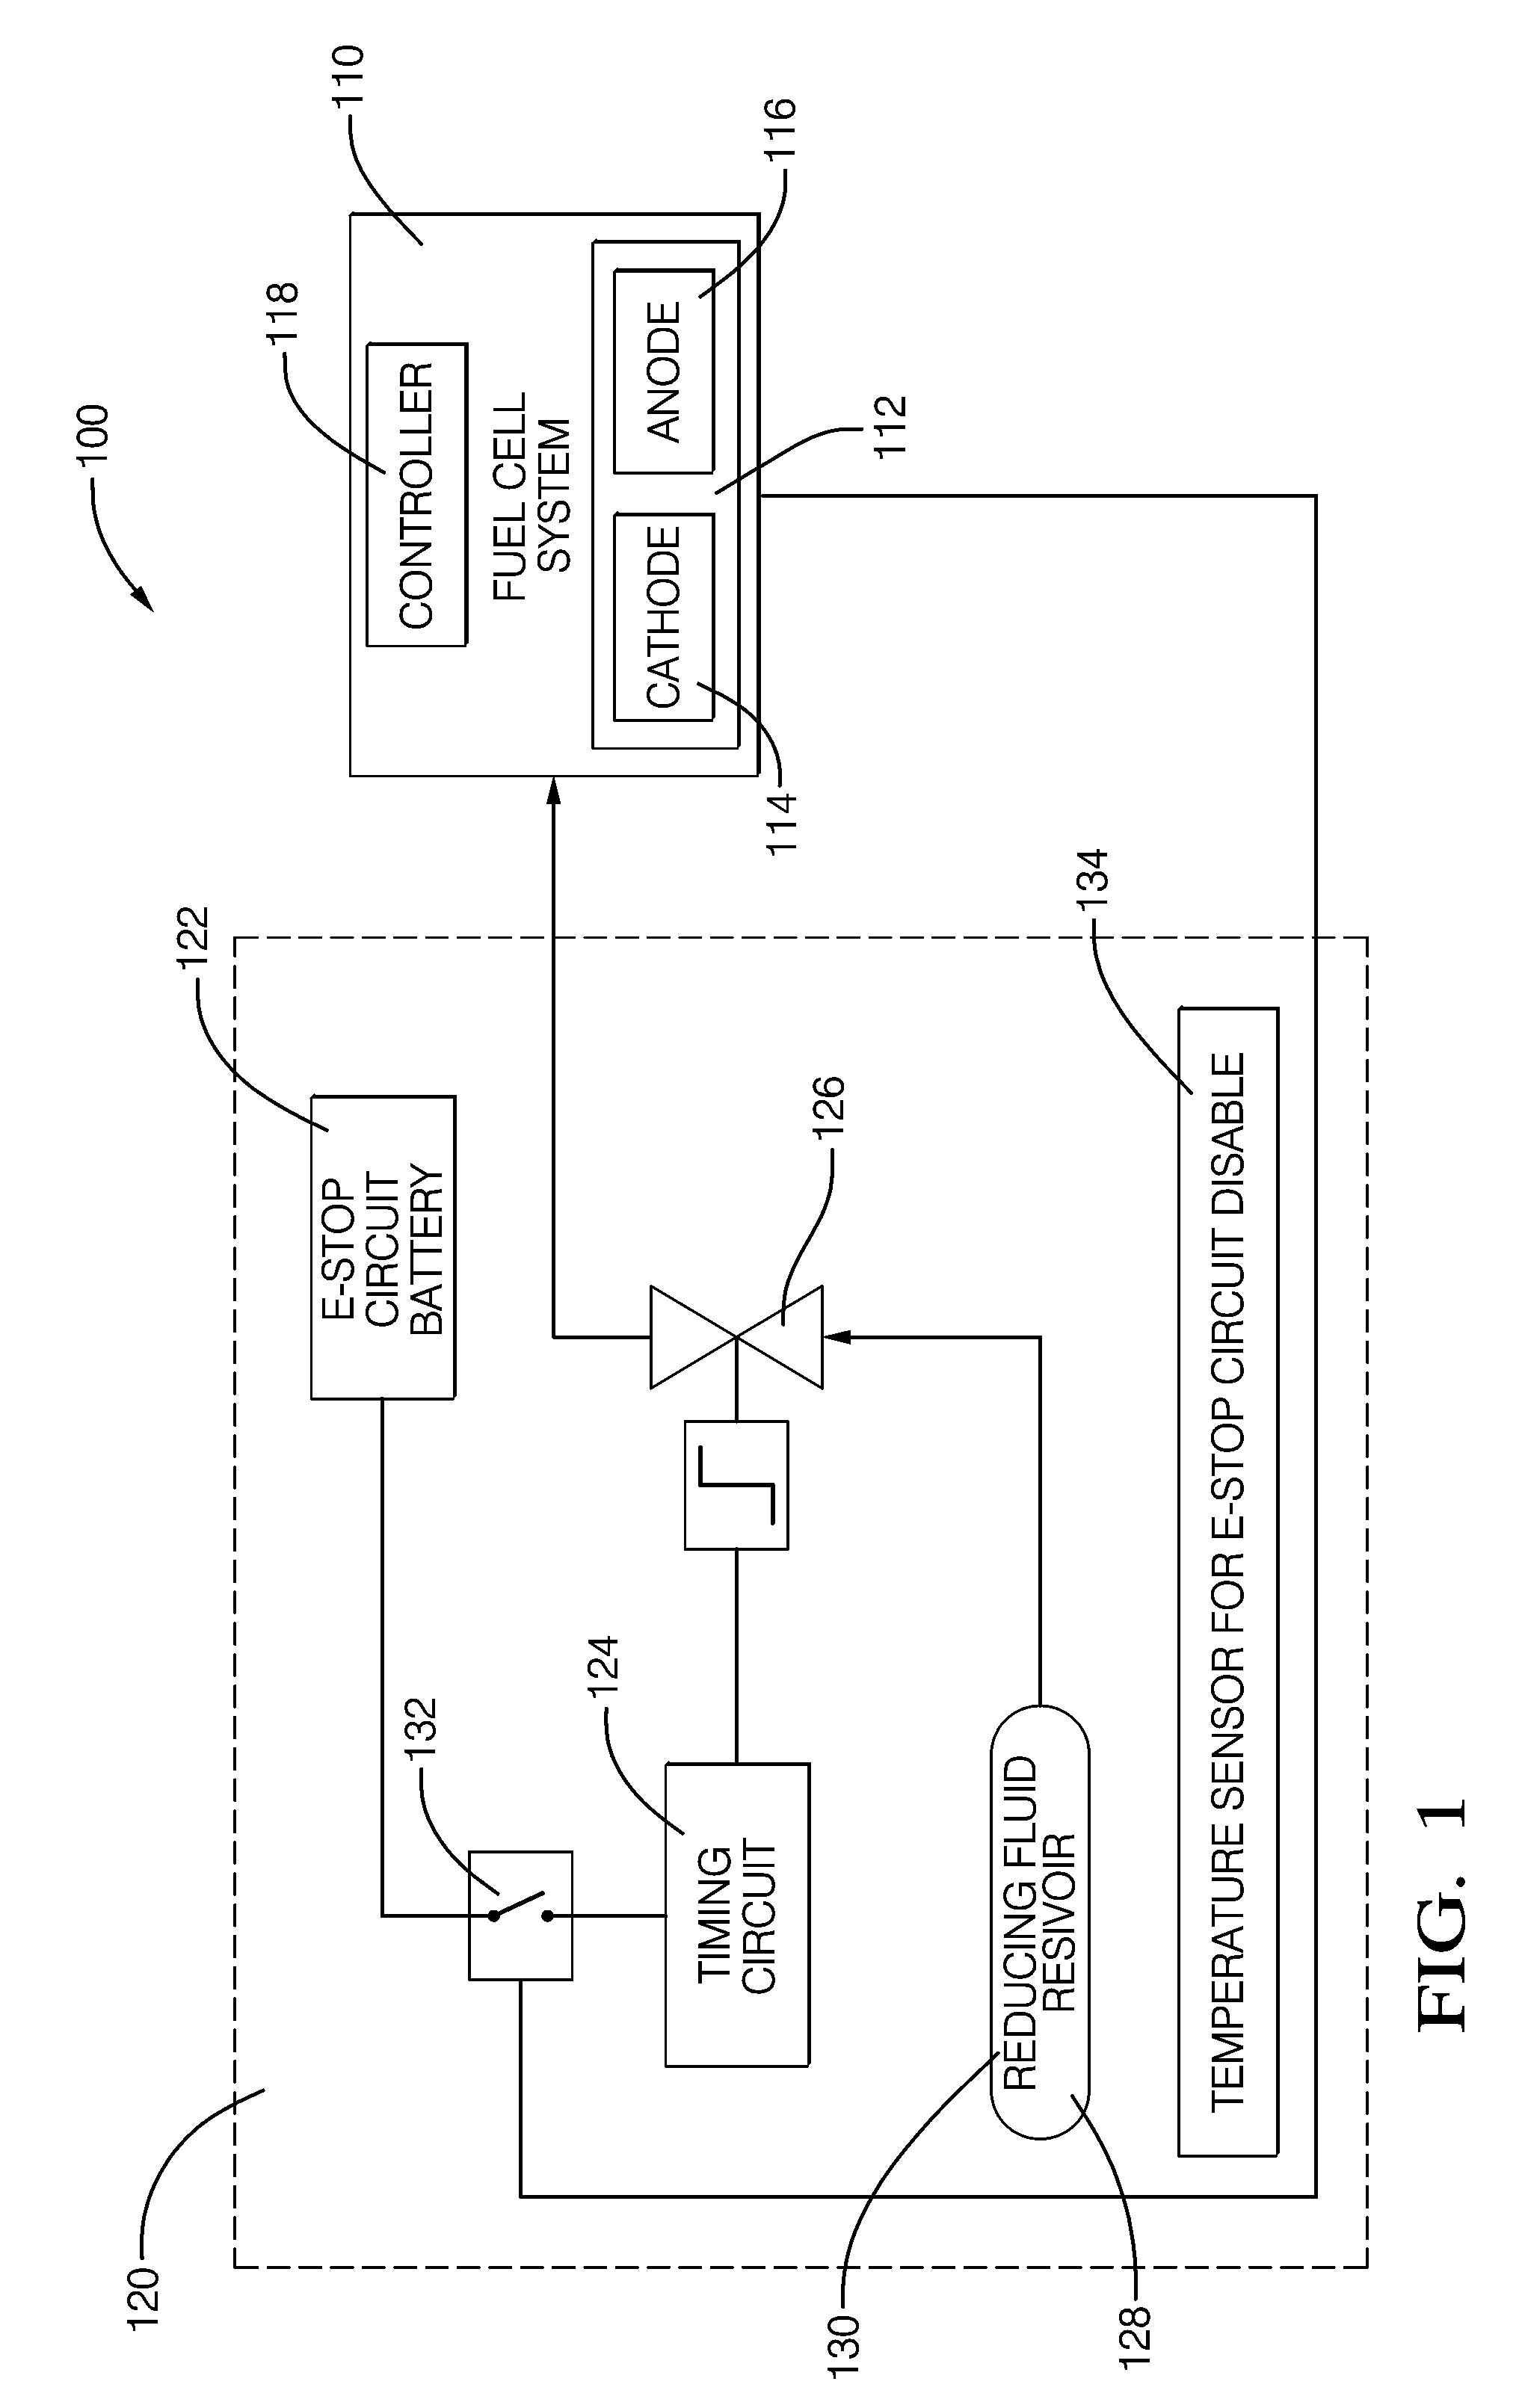 Apparatus for solid-oxide fuel cell shutdown having a timing circuit and a reservoir